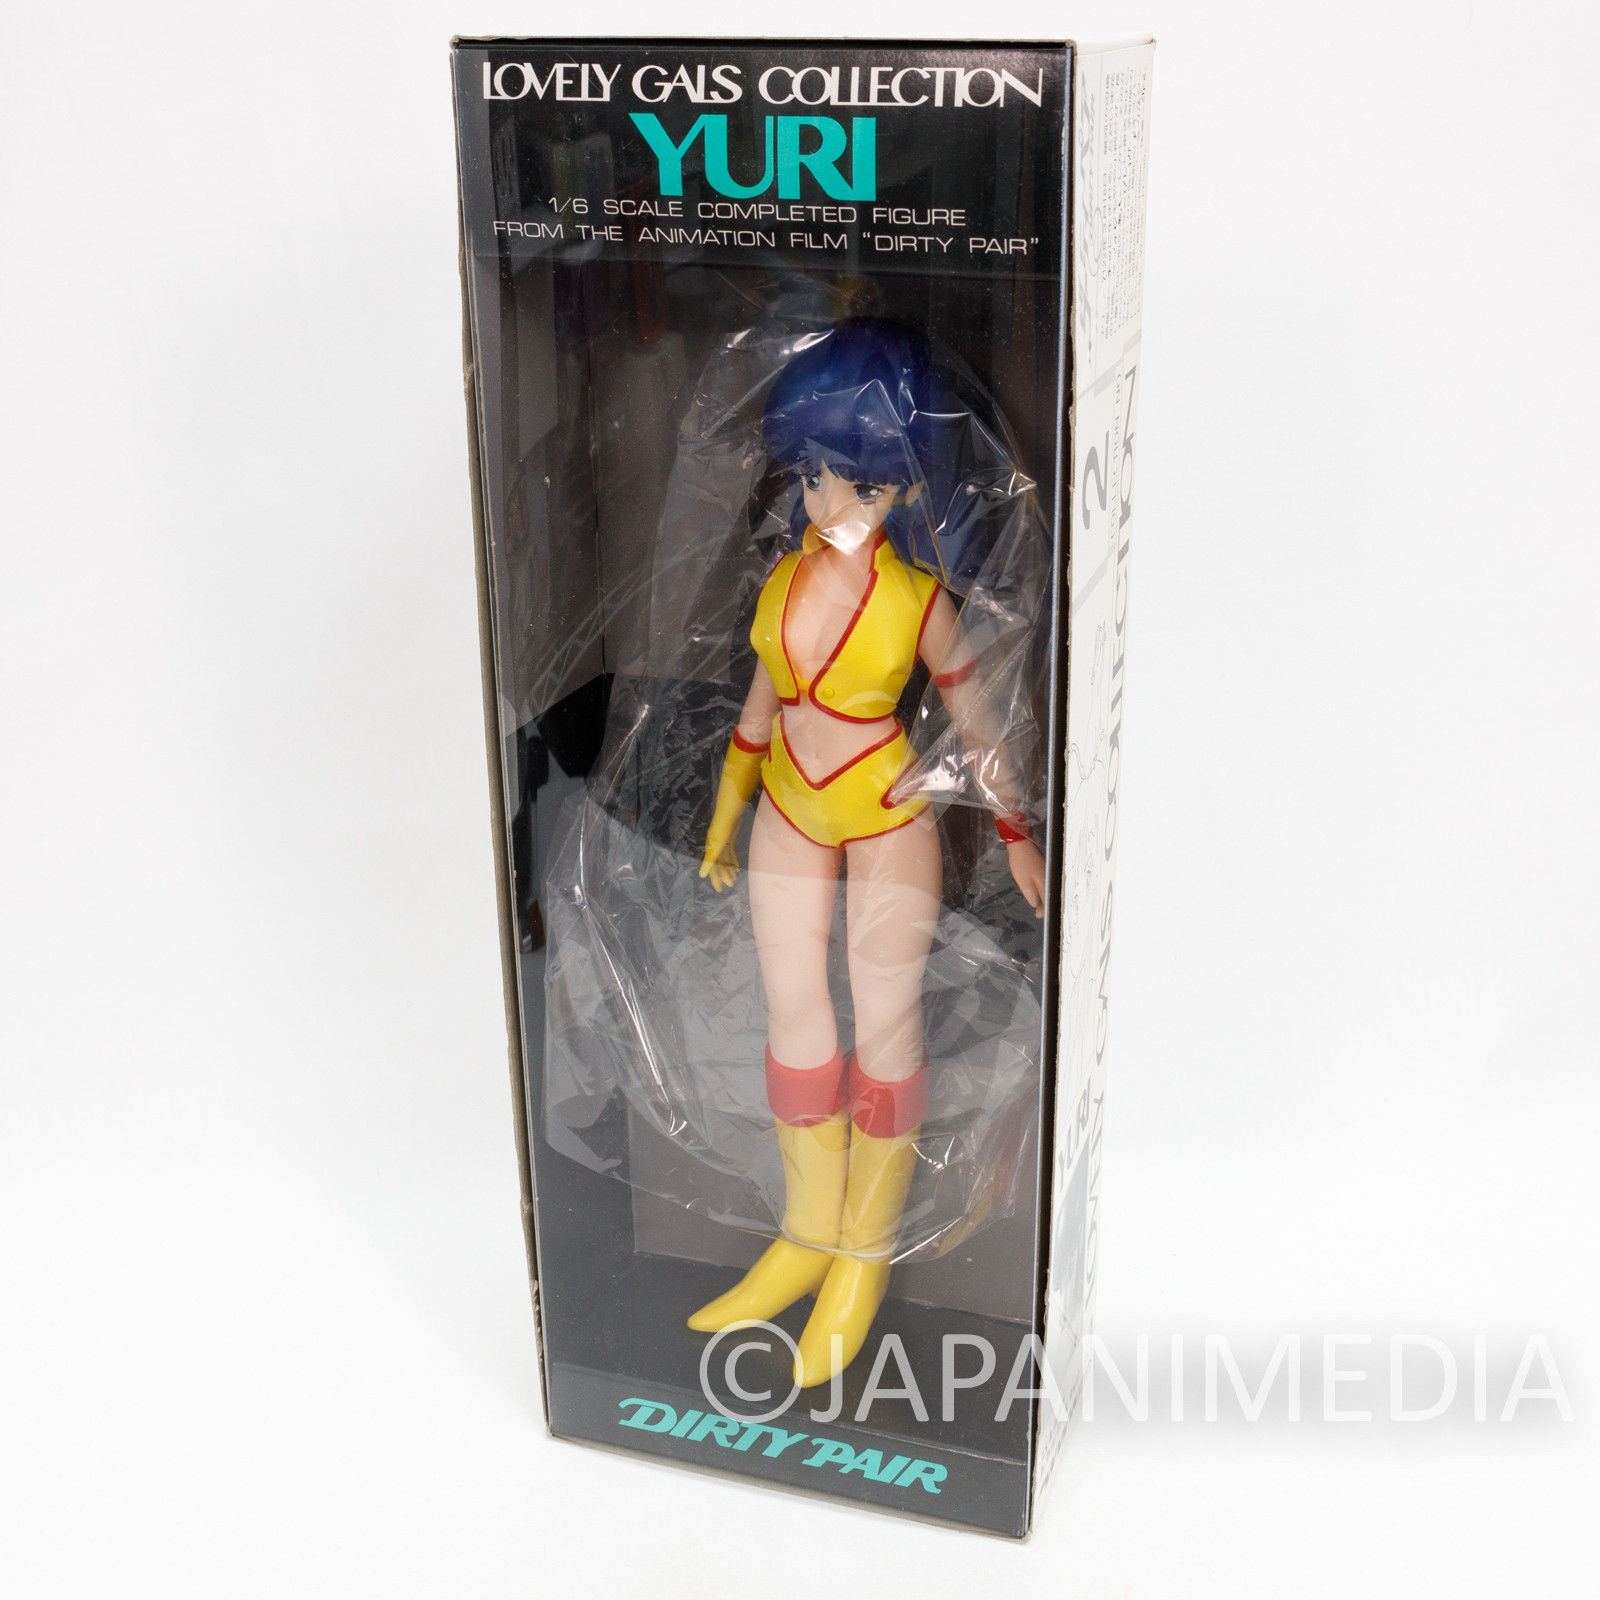 Dirty Pair Yuri Lovery Gals Collection 1/6 Figure Bandai JAPAN ANIME